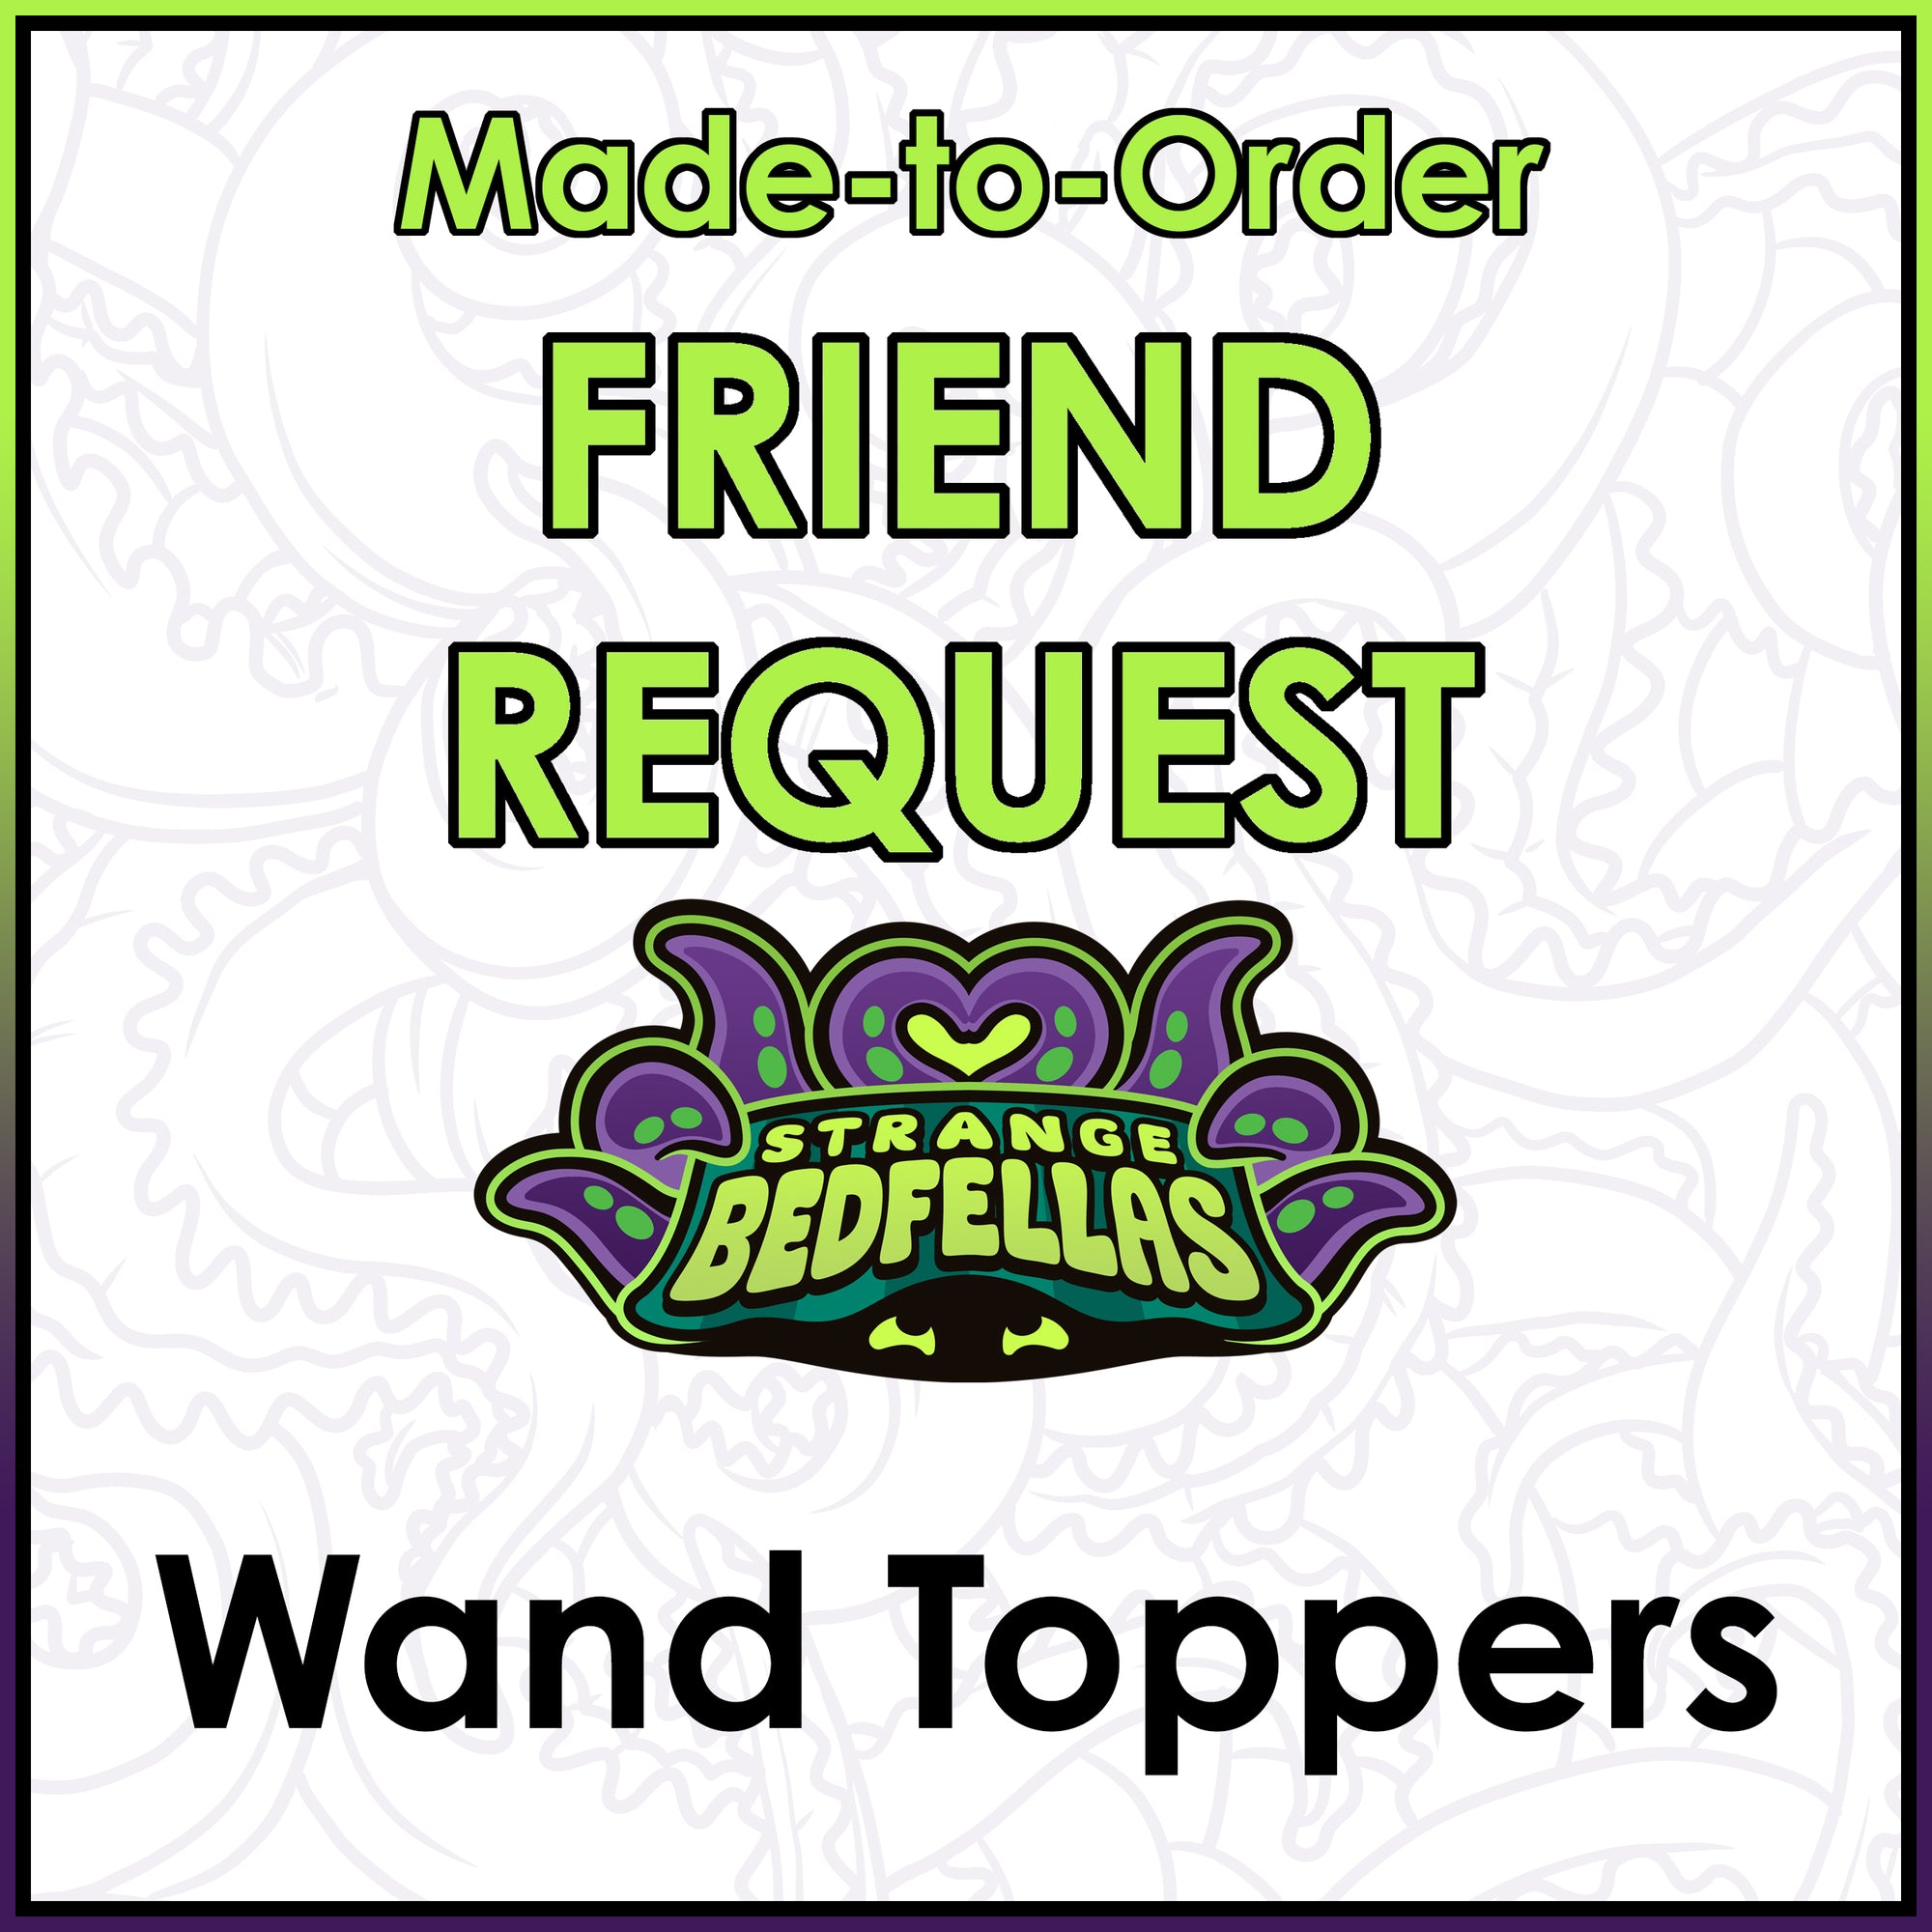 Friend Request -- Wand Toppers